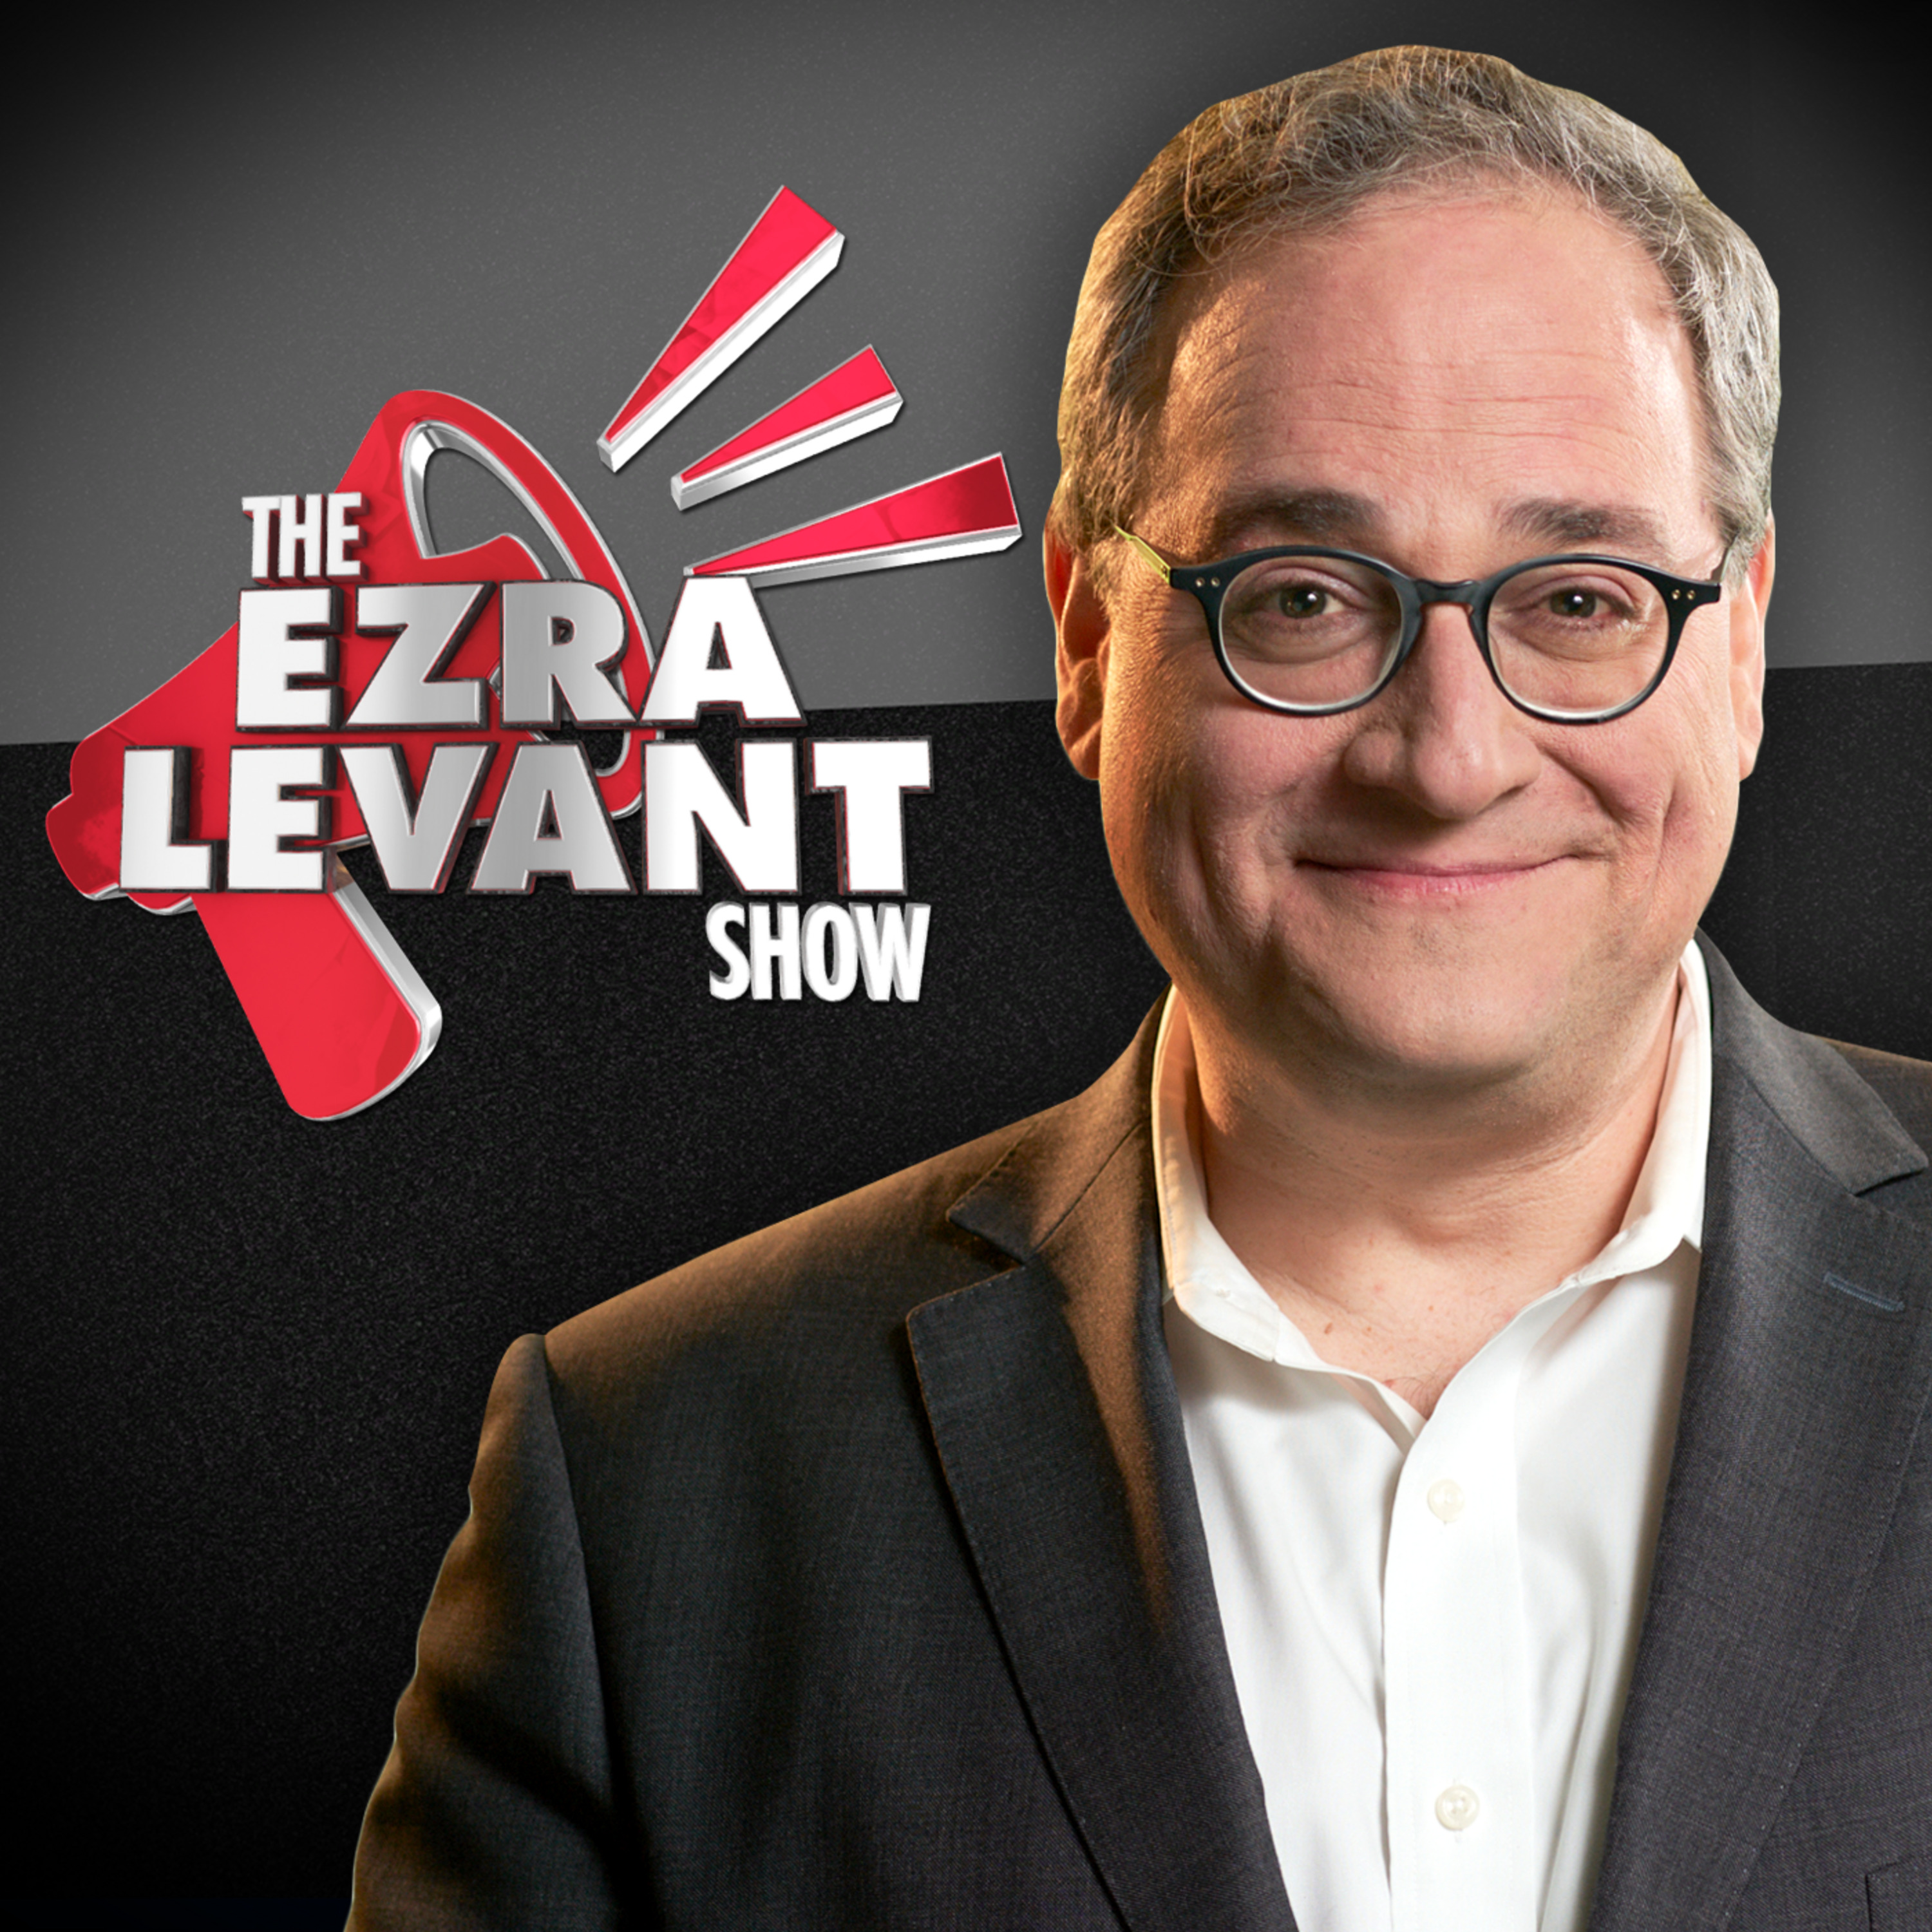 EZRA LEVANT | Canadian-style book censorship comes to China